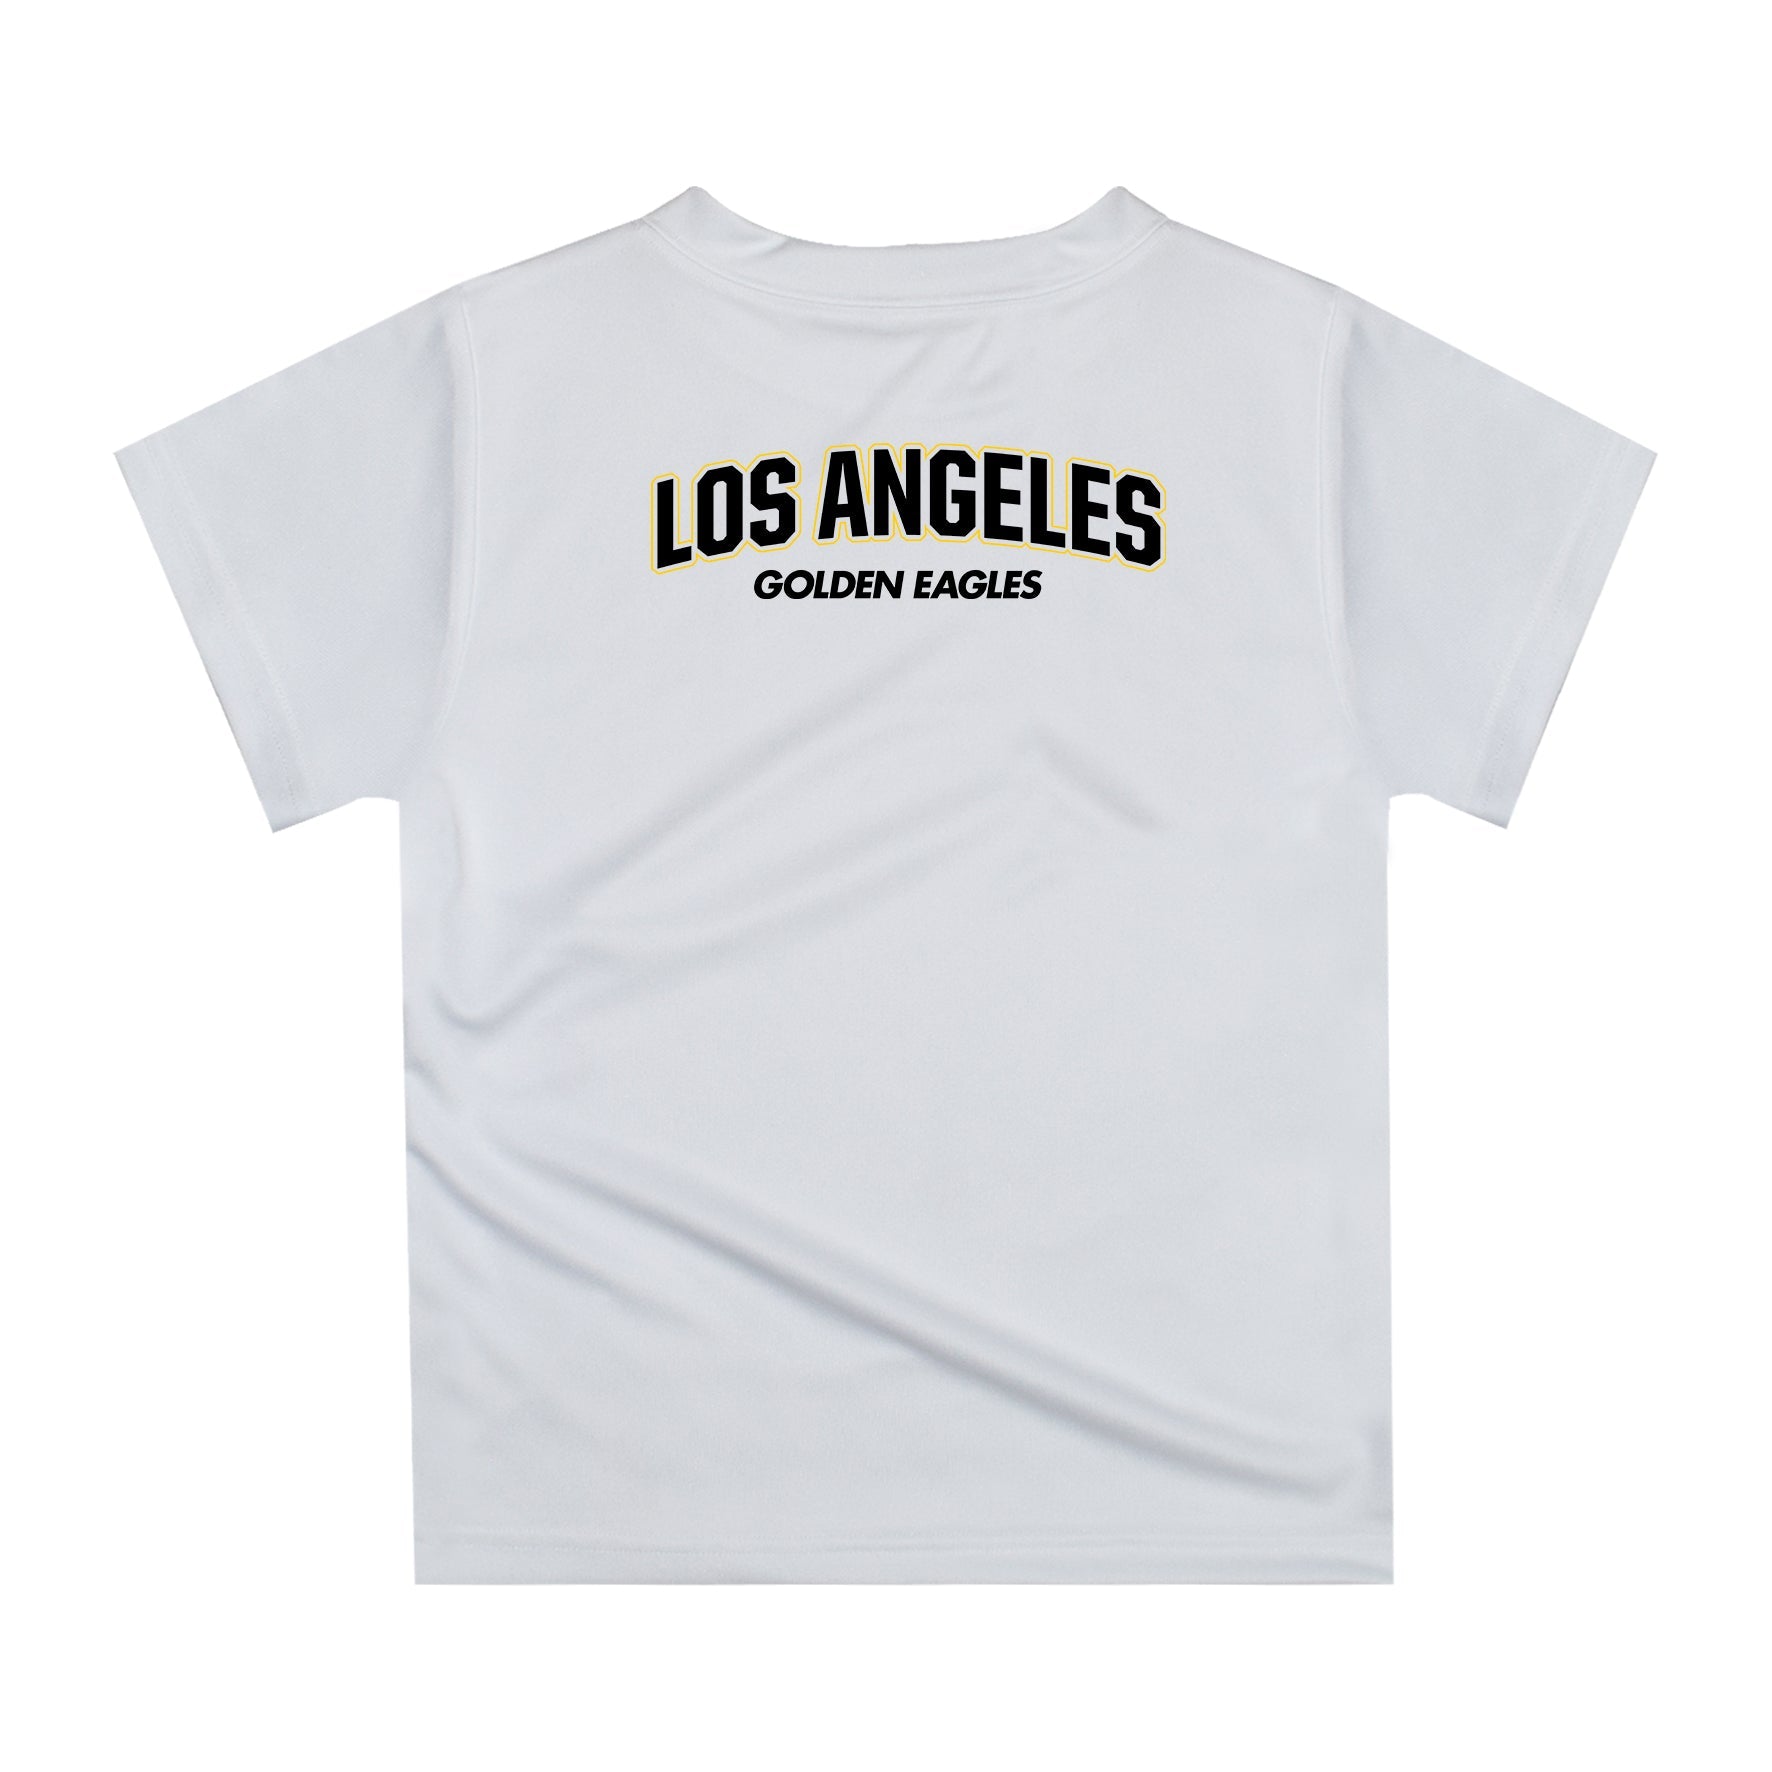 Cal State Los Angeles Golden Eagles Original Dripping Basketball White T-Shirt by Vive La Fete